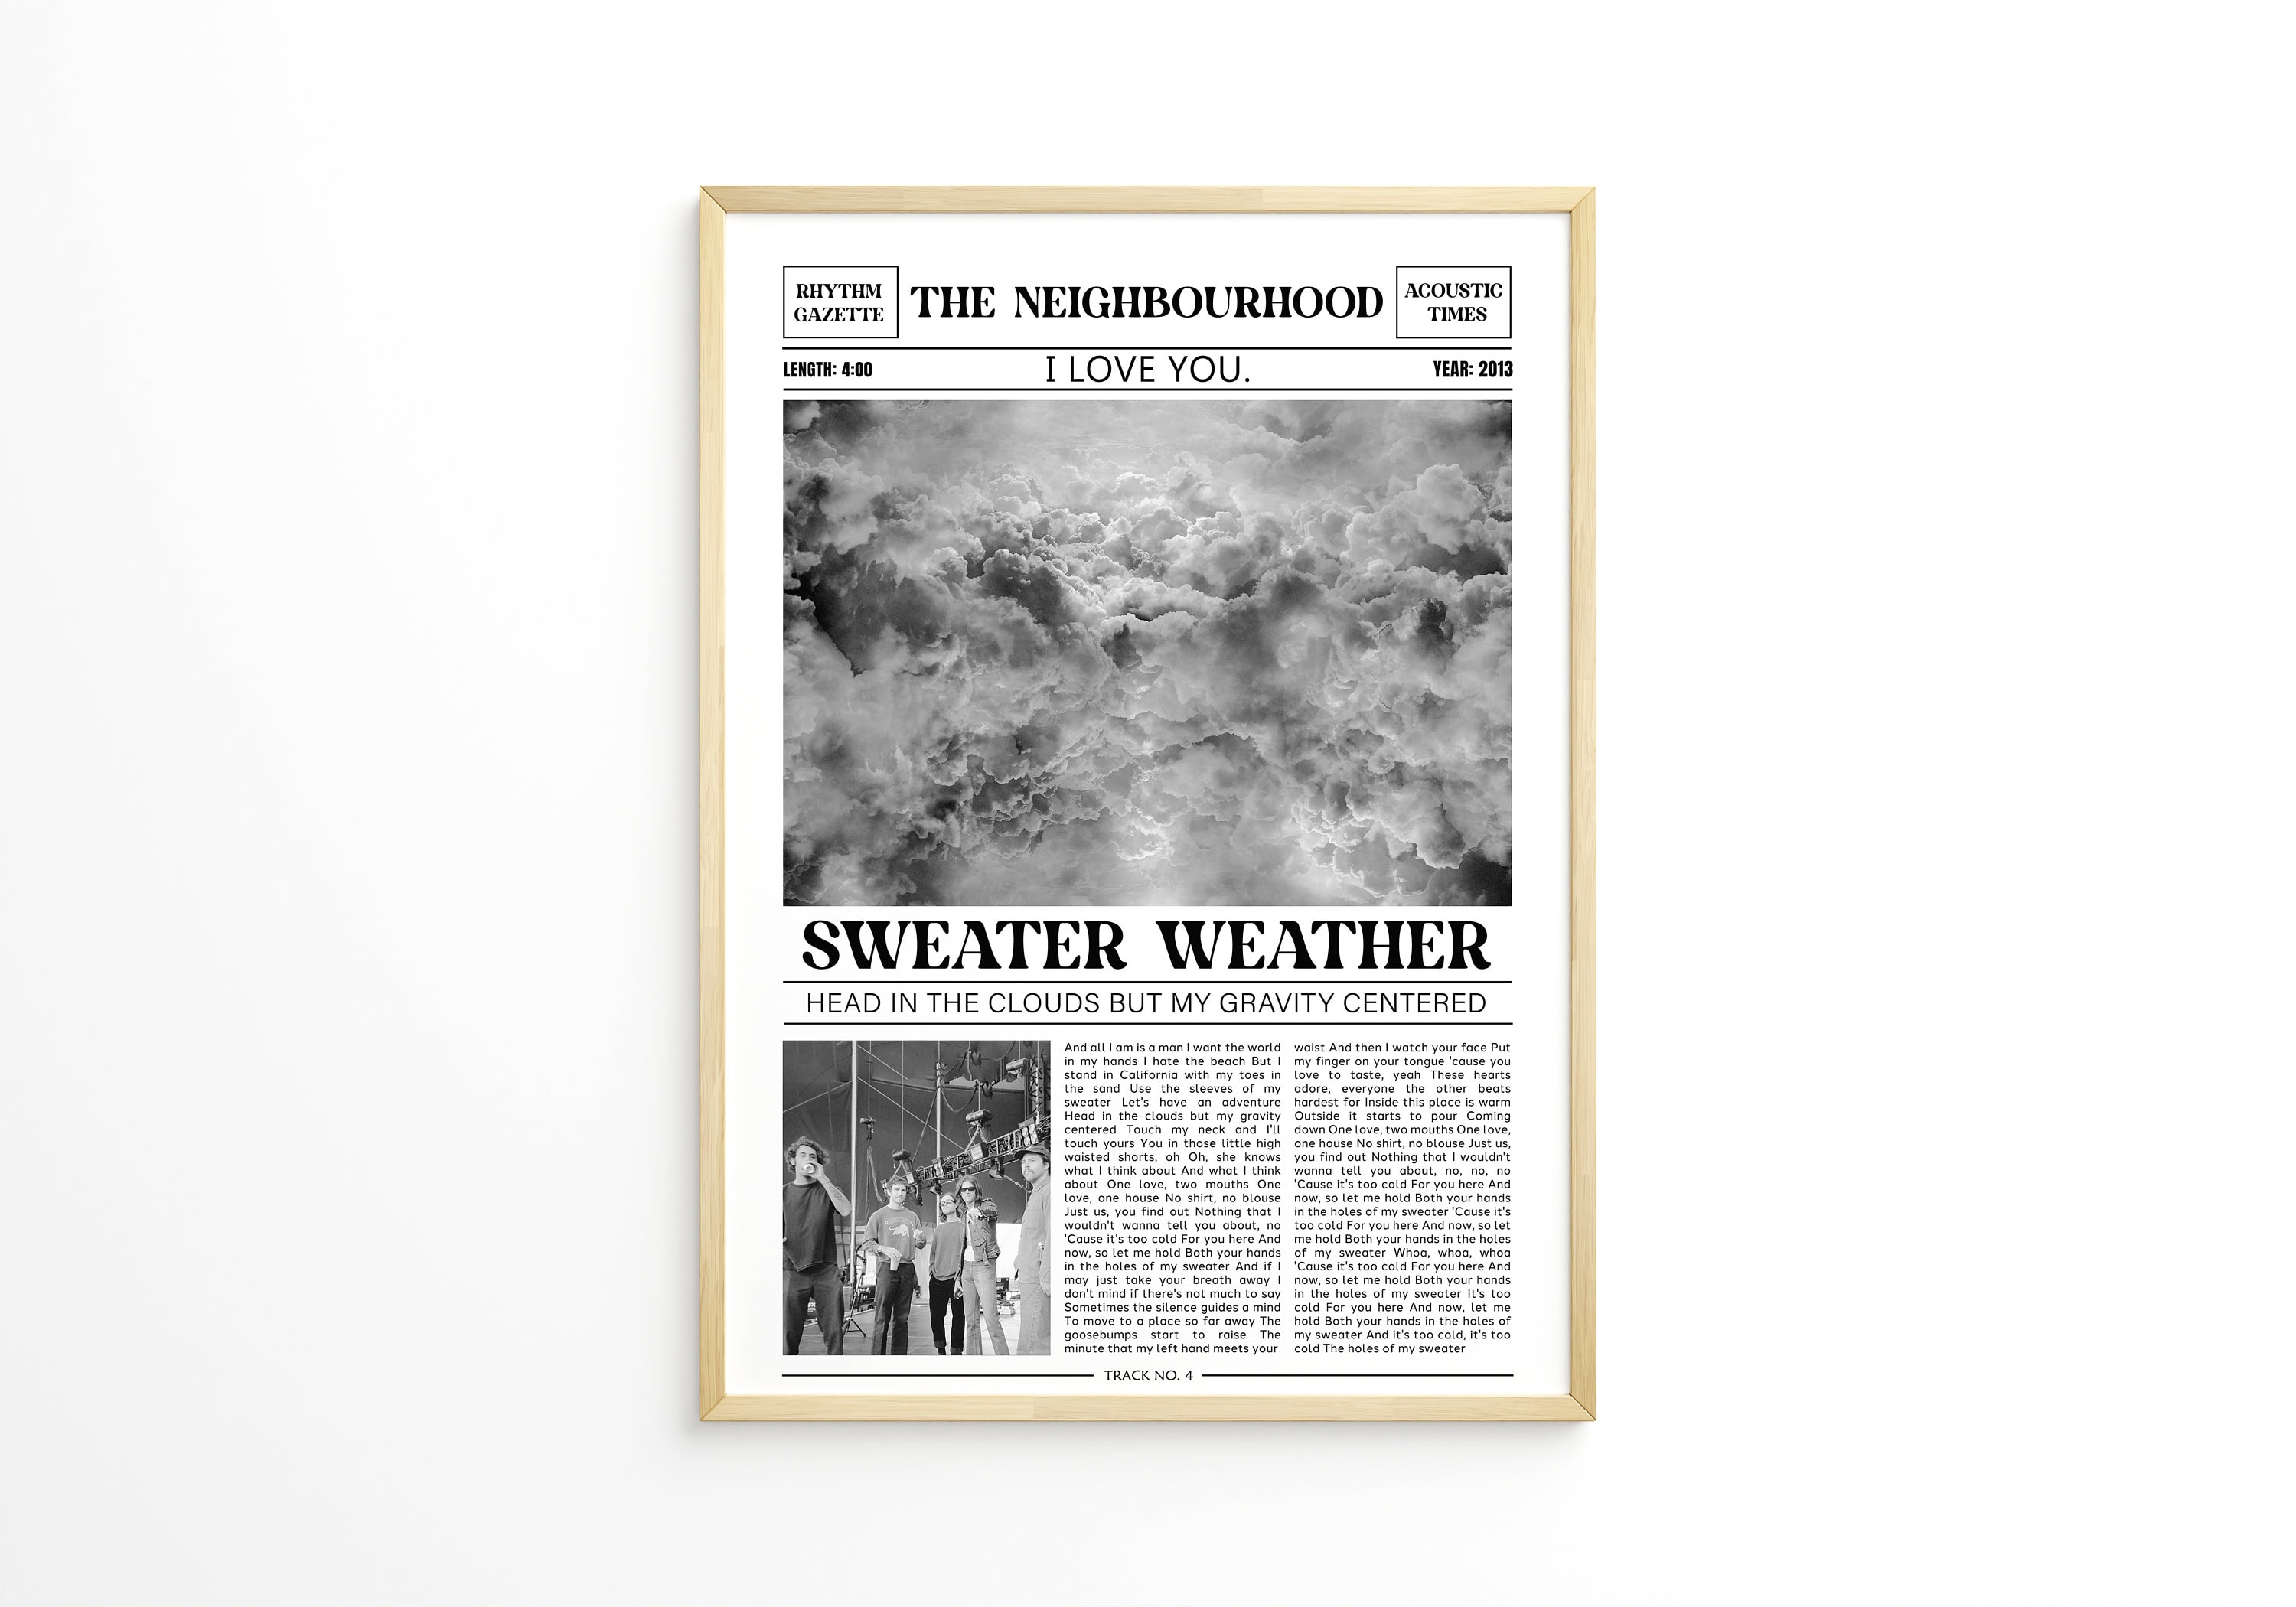 The Neighbourhood - Sweater Weather - Reviews - Album of The Year